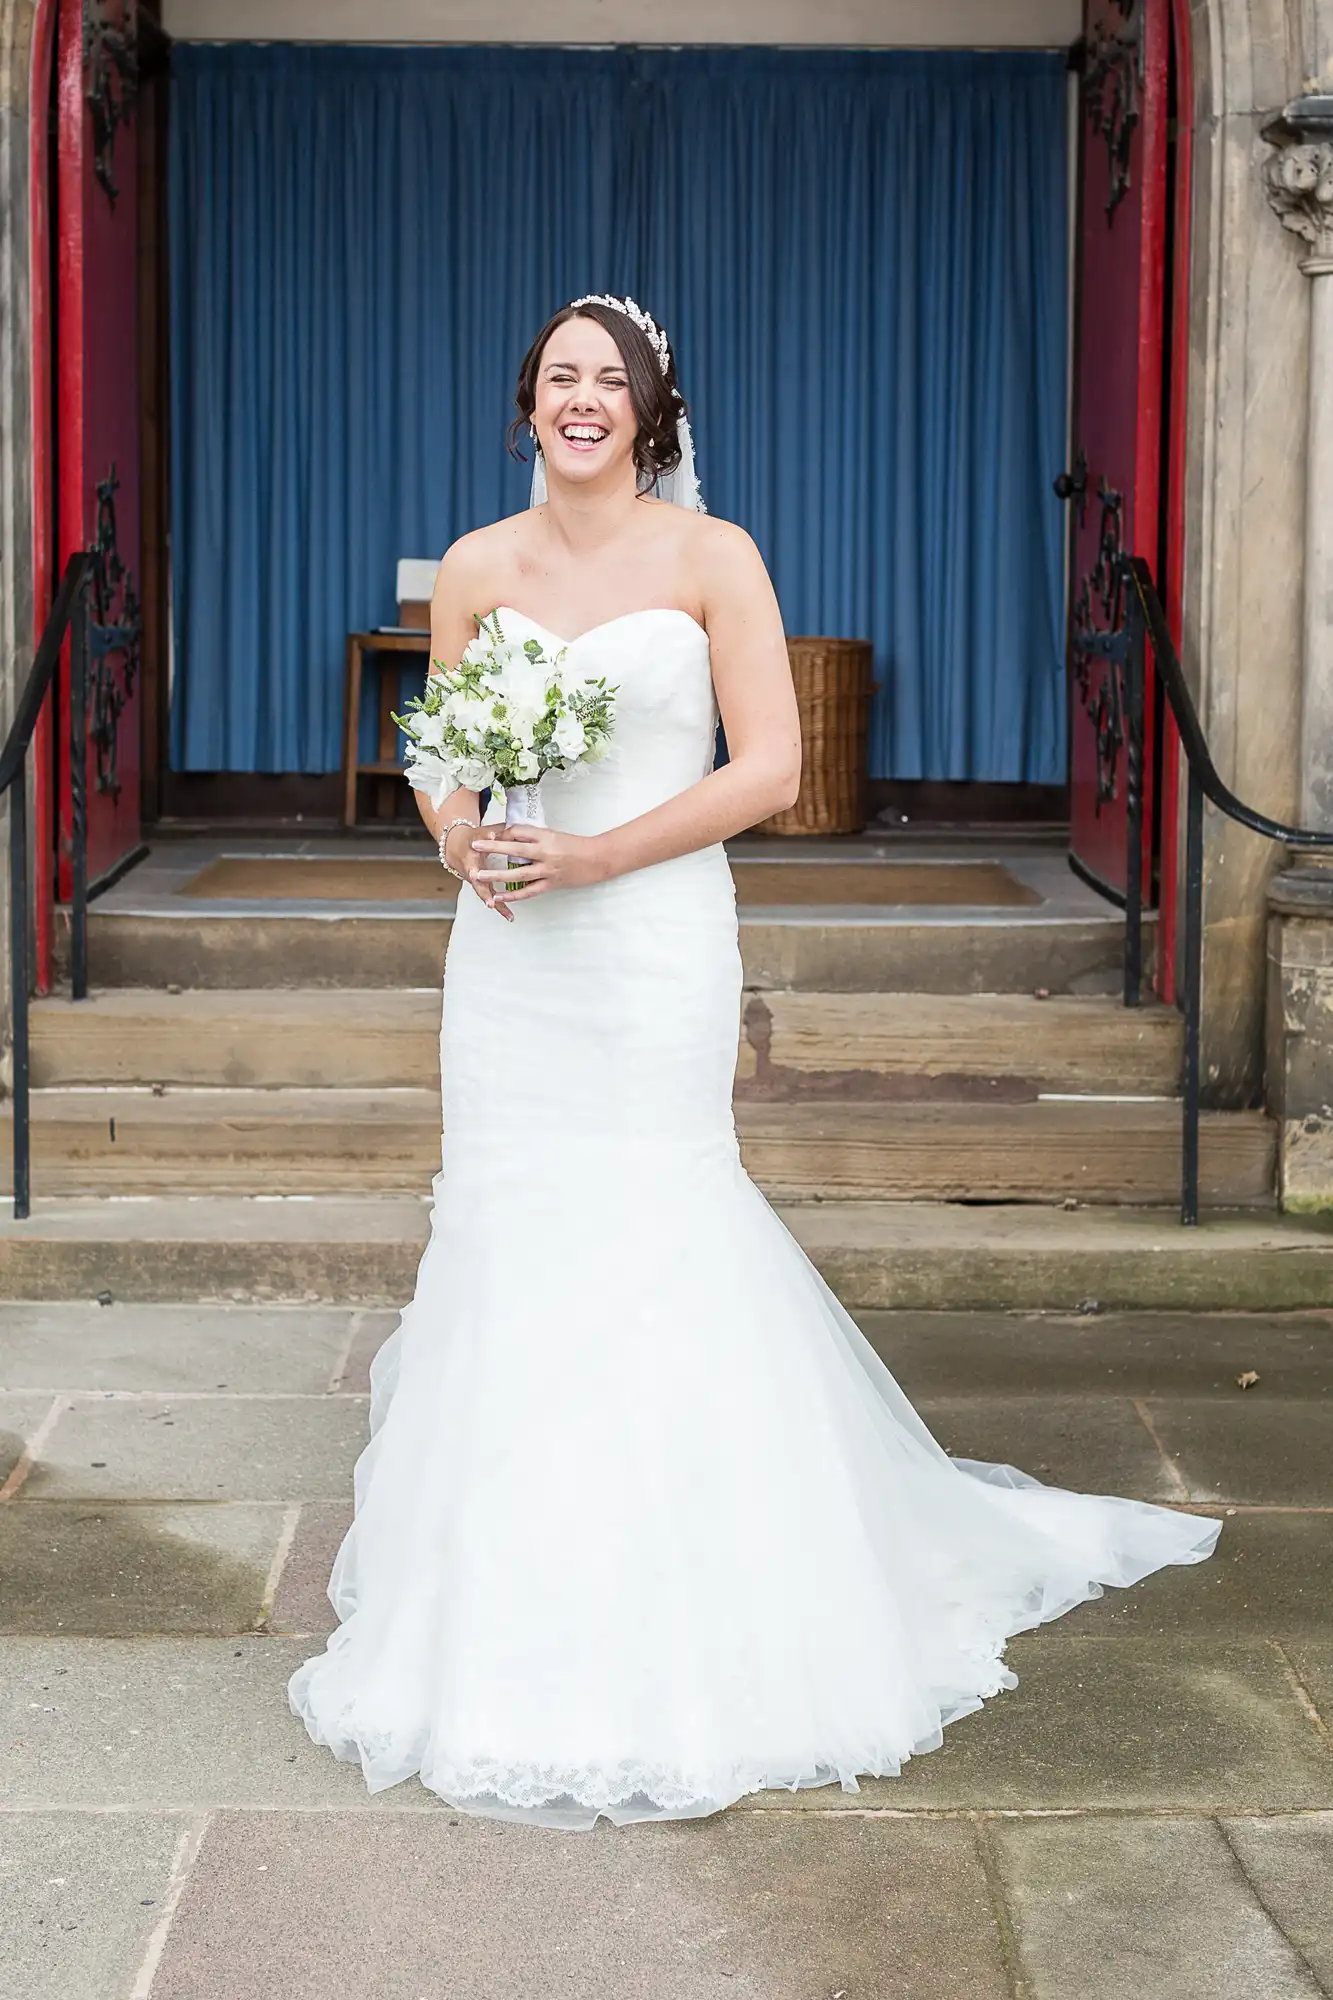 A bride in a strapless white gown laughs joyously, holding a bouquet, in front of a blue curtained doorway.